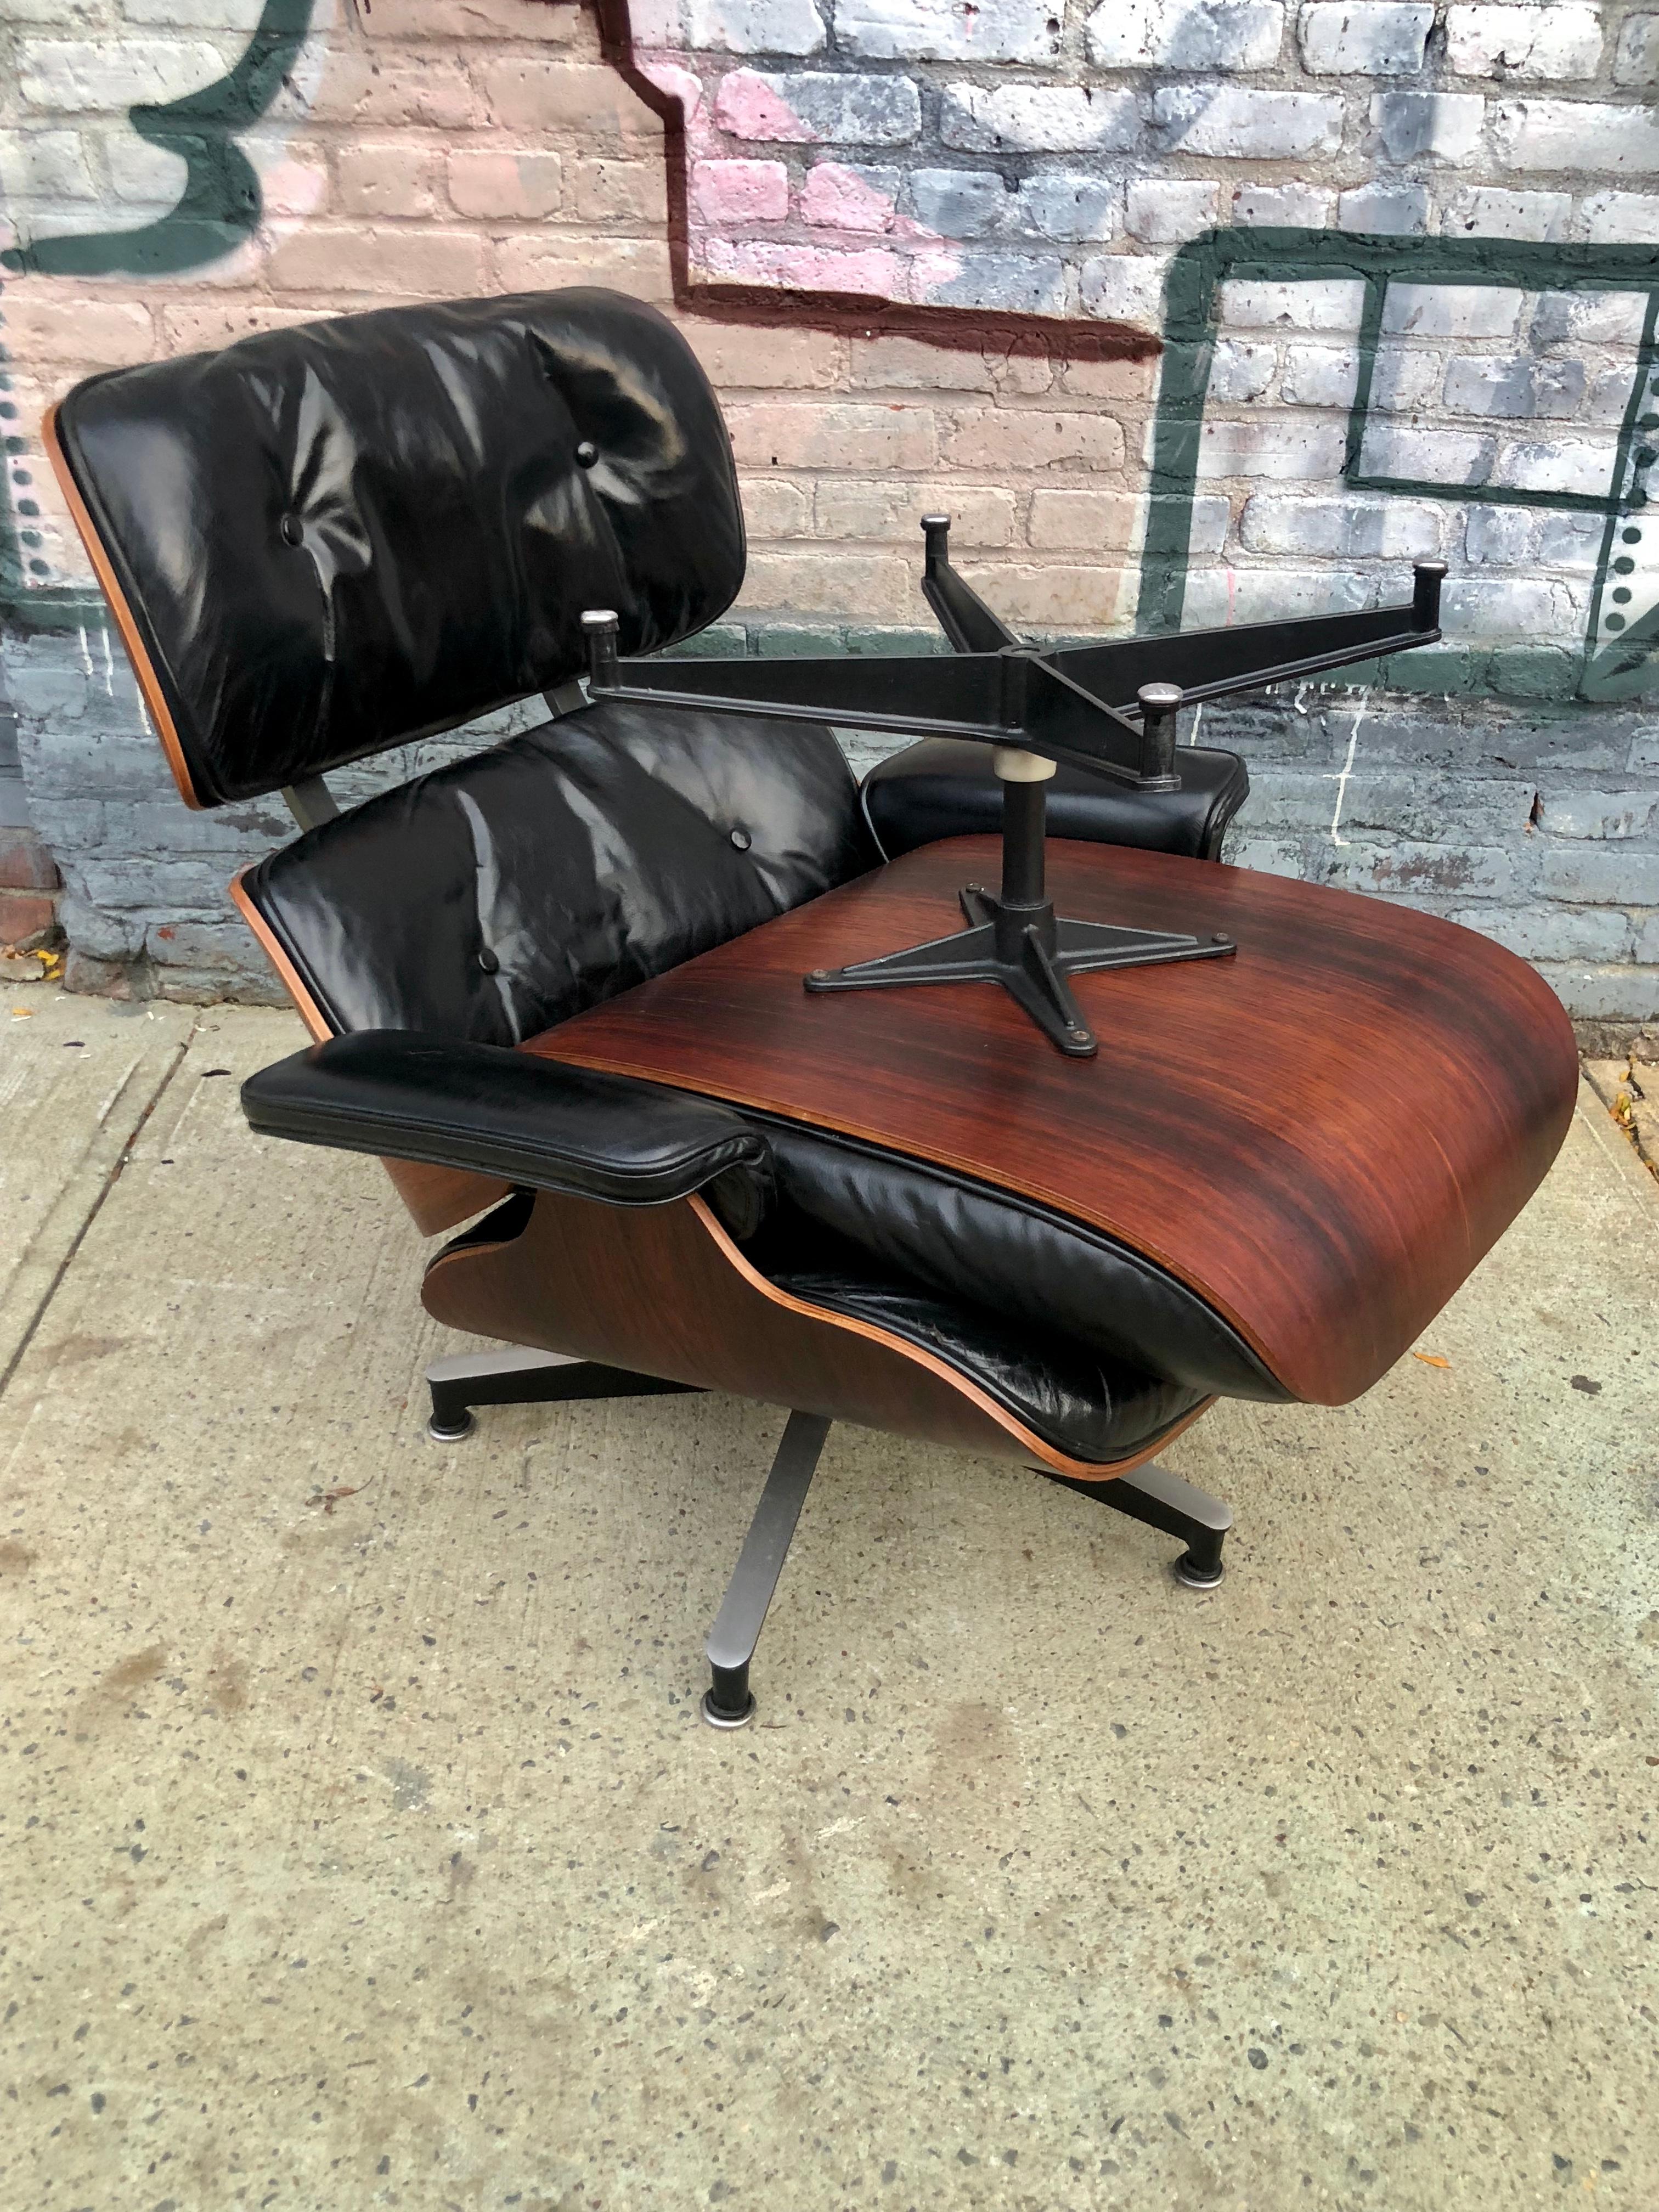 Gorgeous Herman Miller Eames lounge chair and ottoman, circa early 1960s. Signed and in original condition. Purchased from family of original owner. Down filled black leather cushions. A classic example of the iconic design.